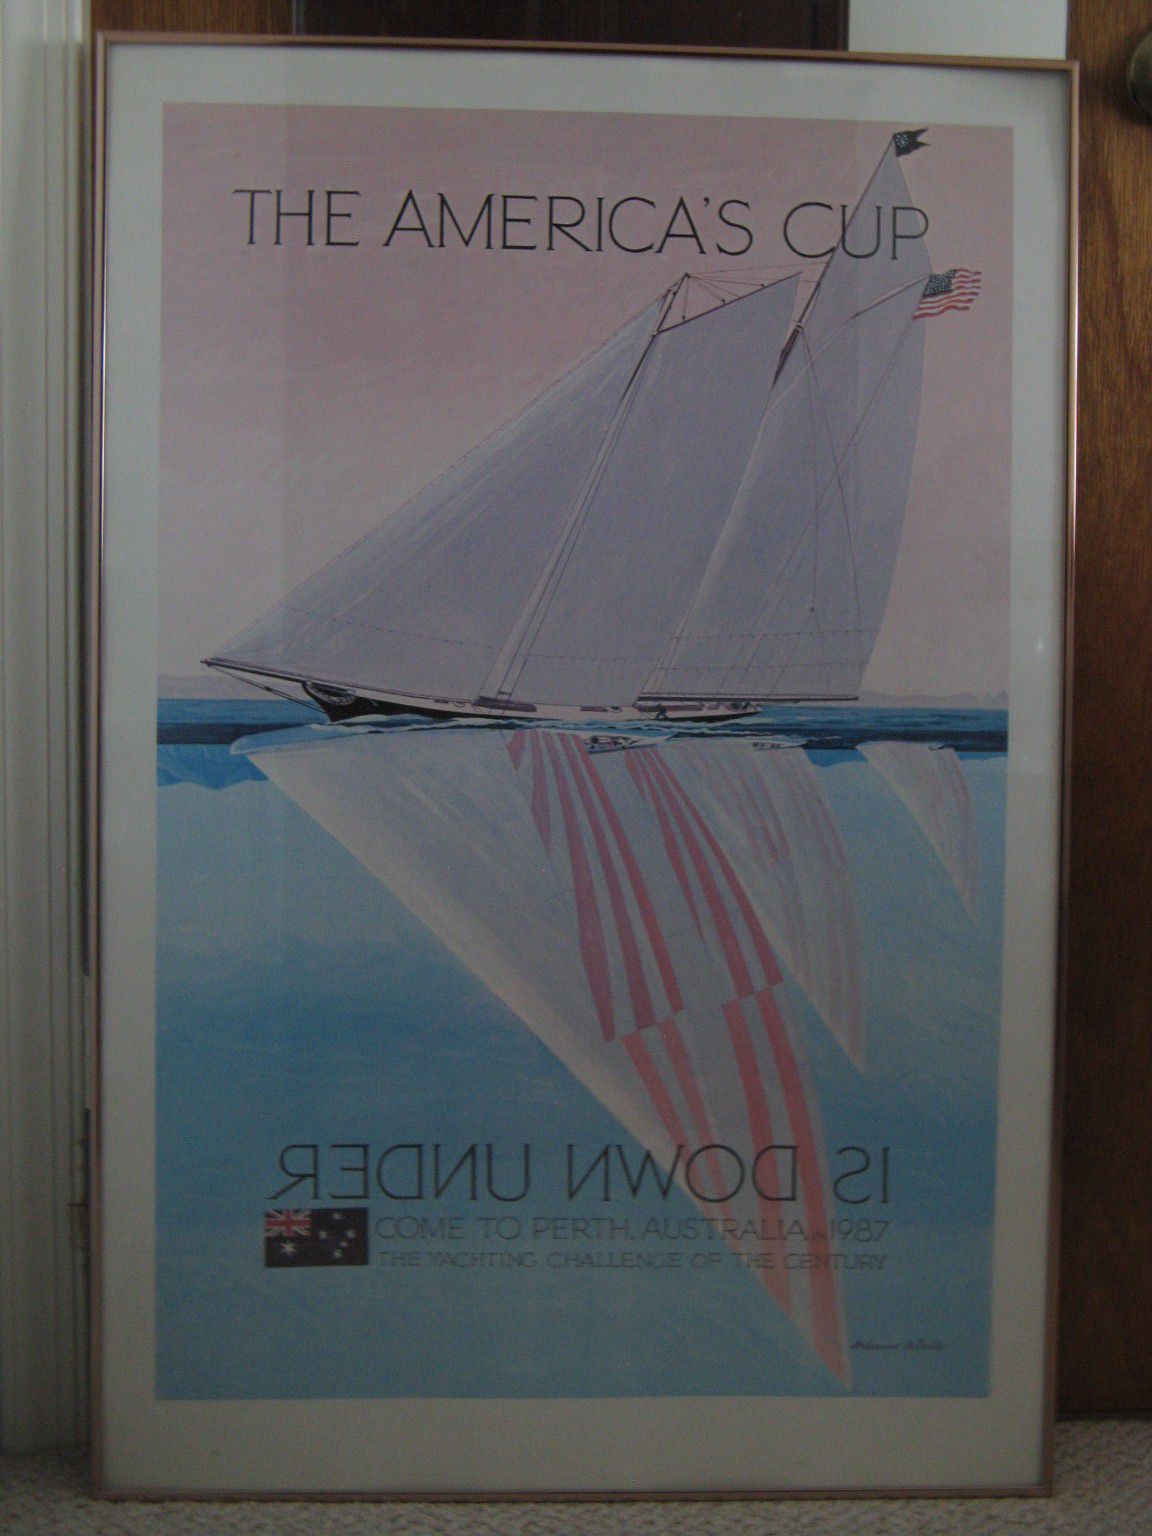 The America's Cup Is Down Under framed poster